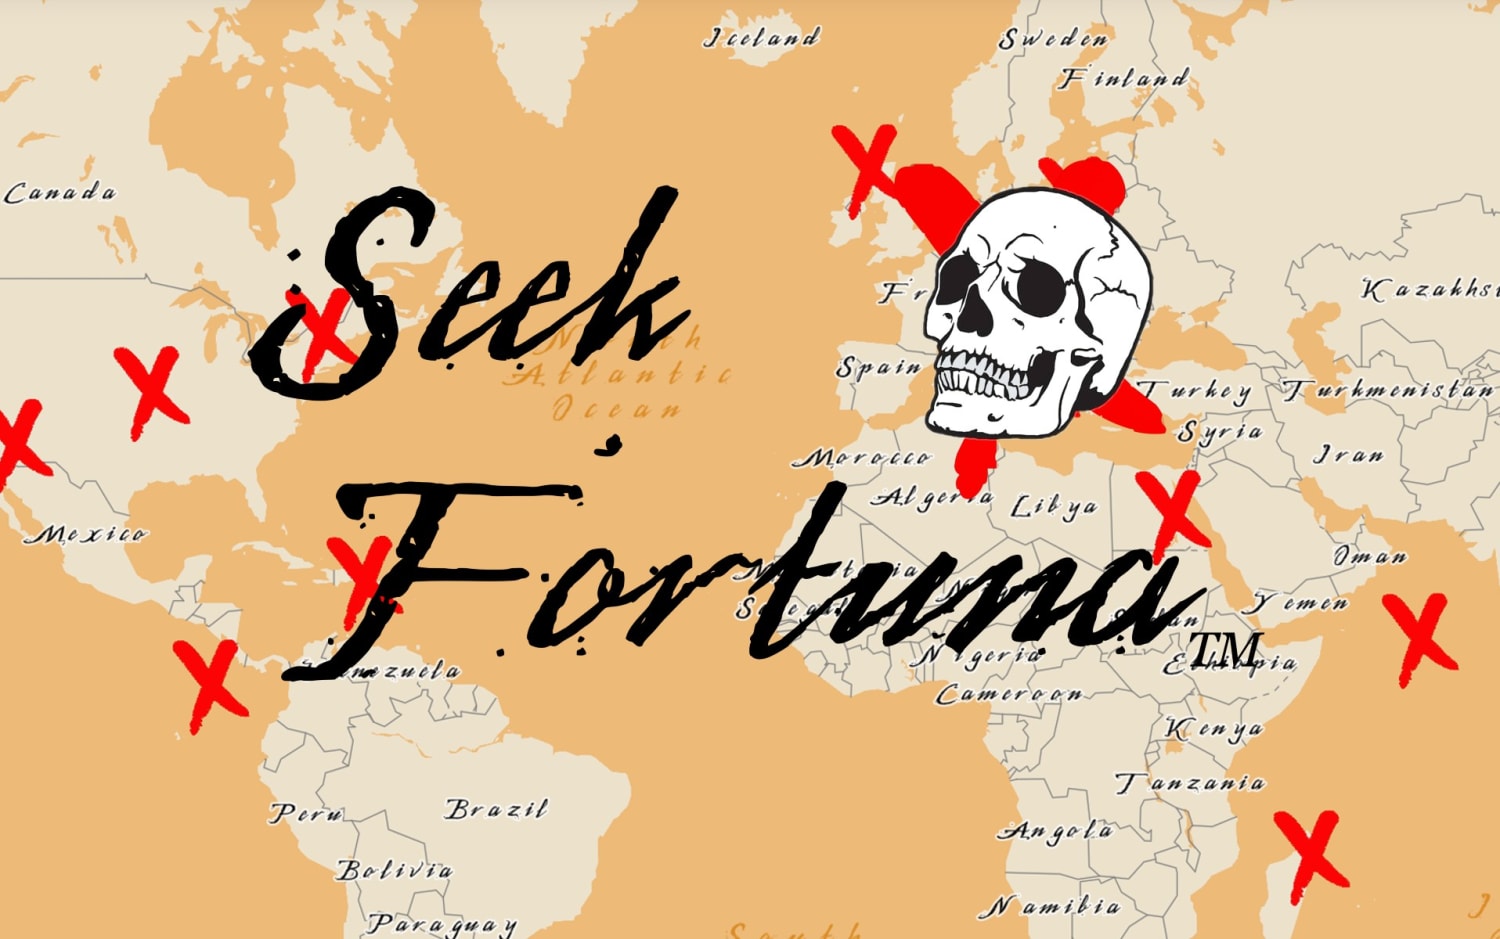 In my free time I decided to make a treasure hunting website with an interactive map. Still in the beginning phases and doing my research, but would love if you checked it out! www.seekfortuna.com